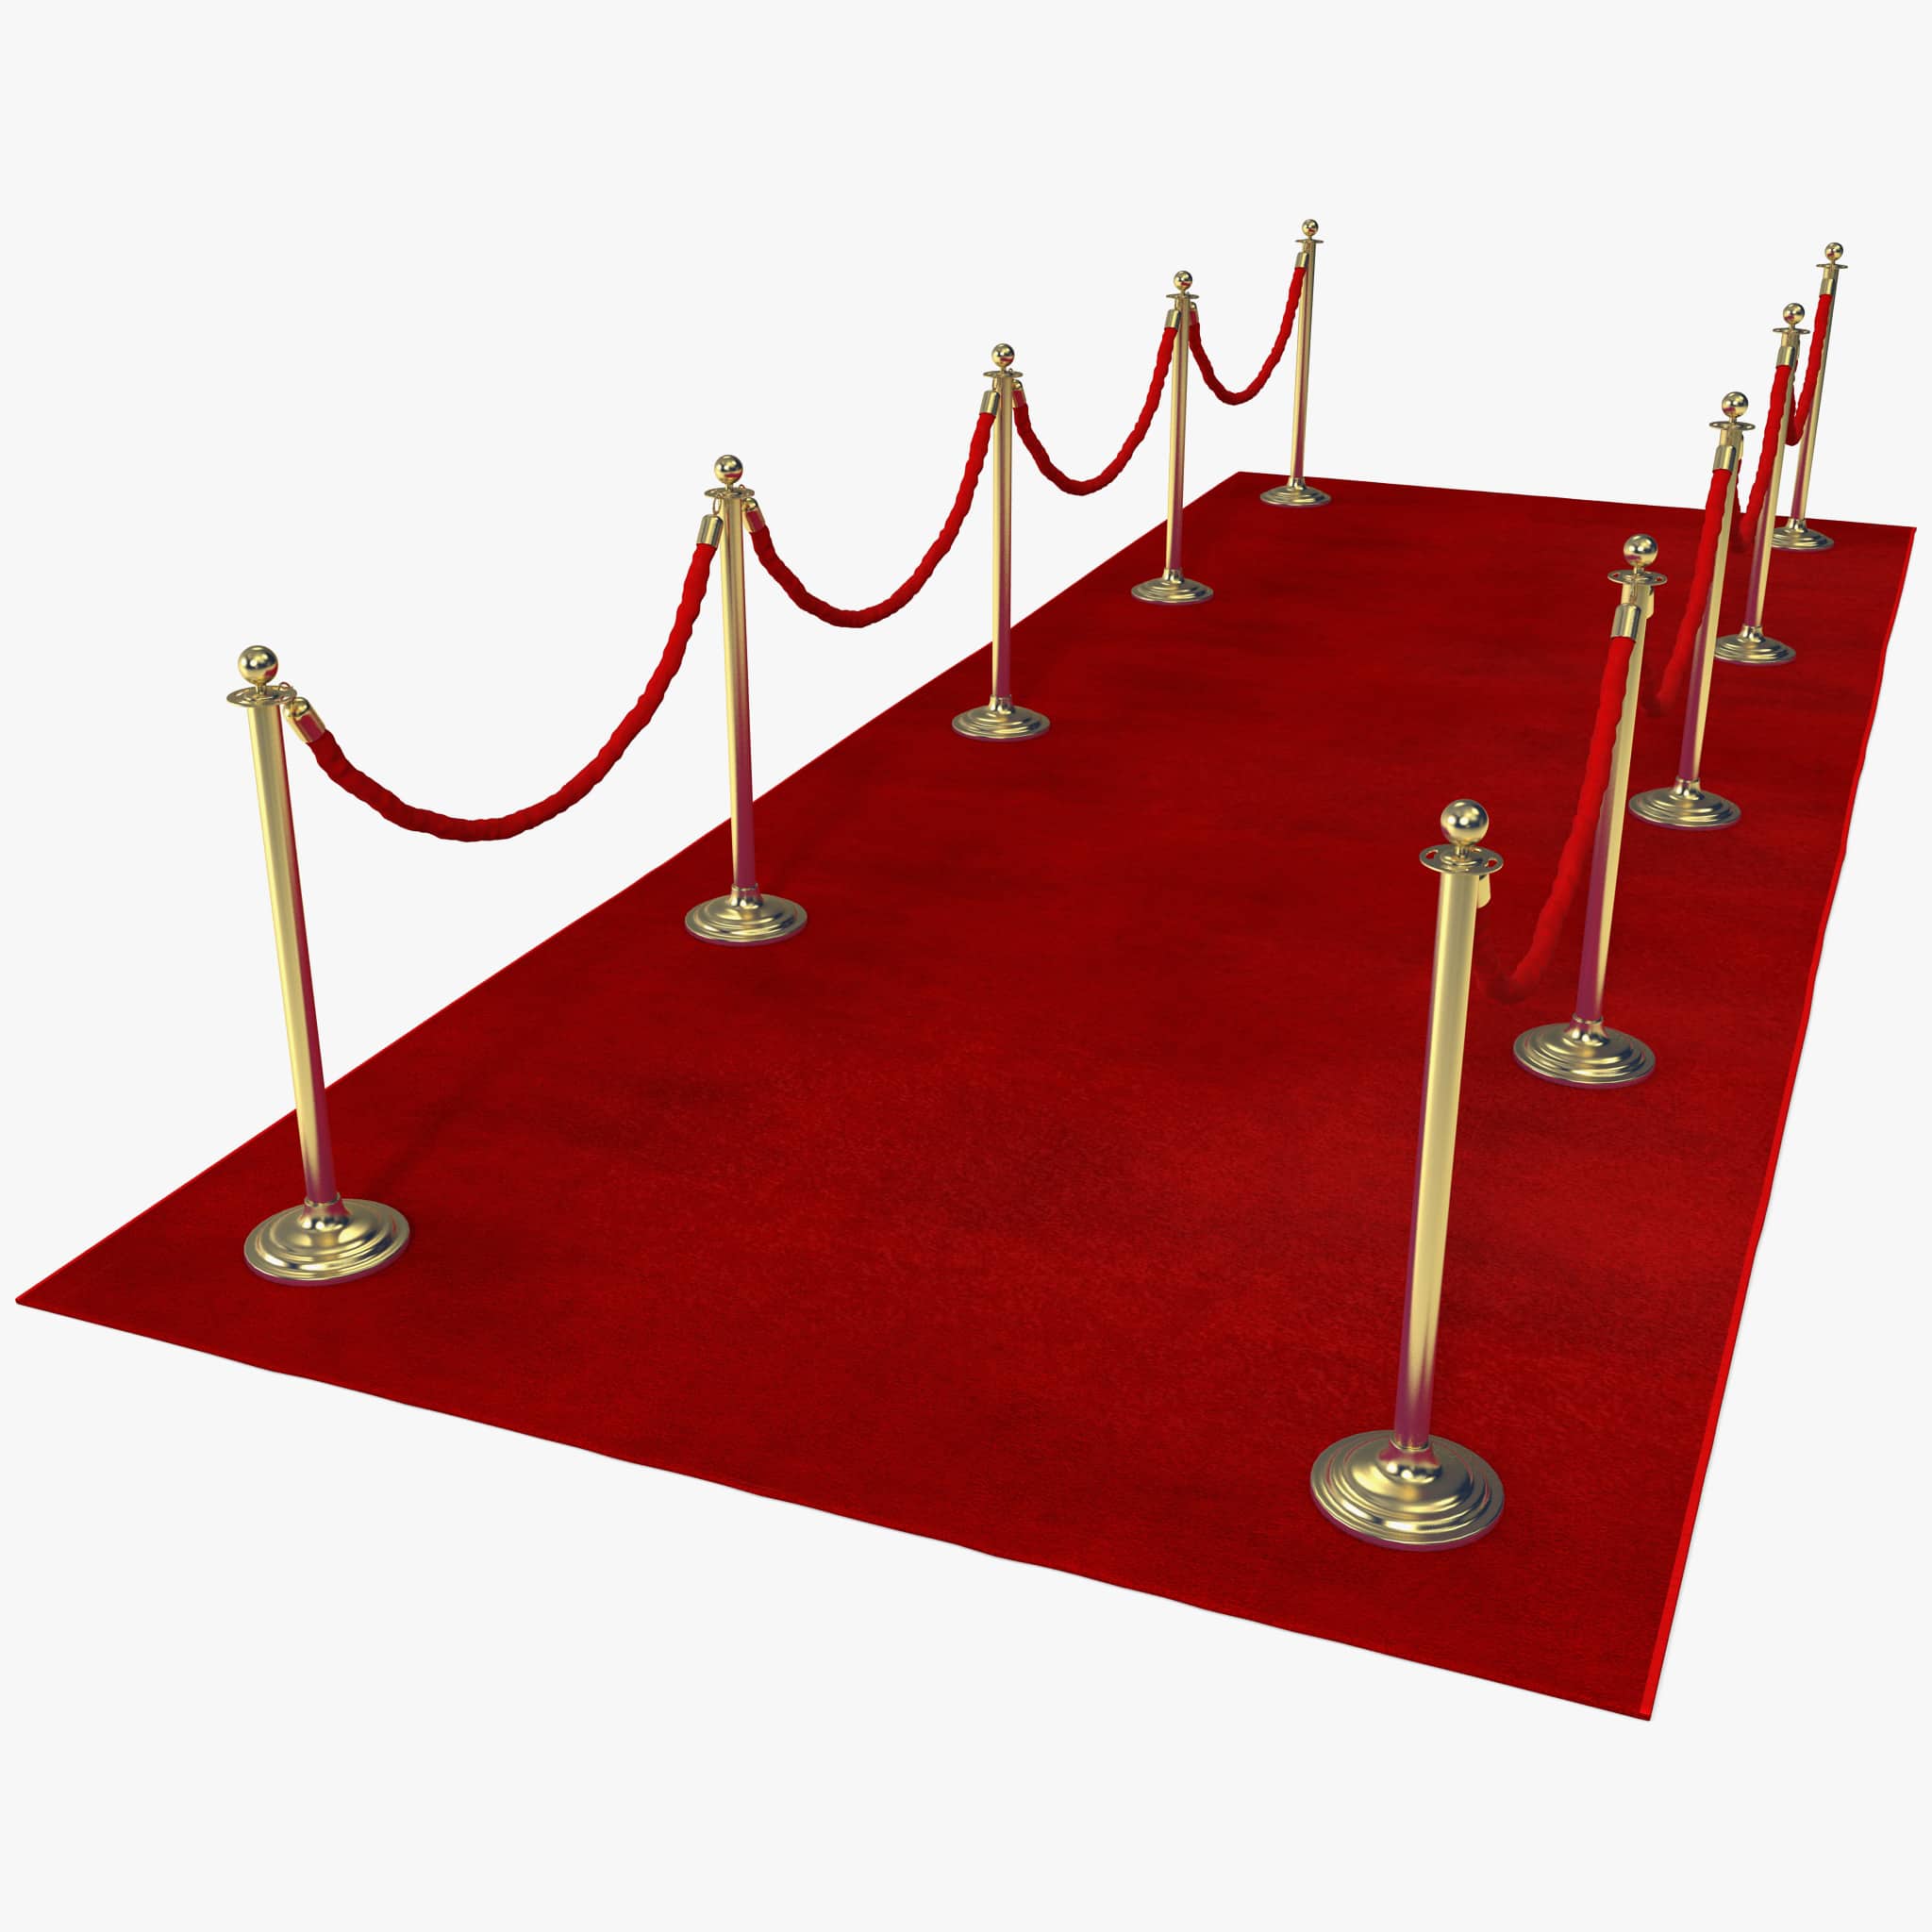 https://usercontent.one/wp/www.funpic.ch/wp-content/uploads/2023/07/red-carpet.jpeg?media=1713003296